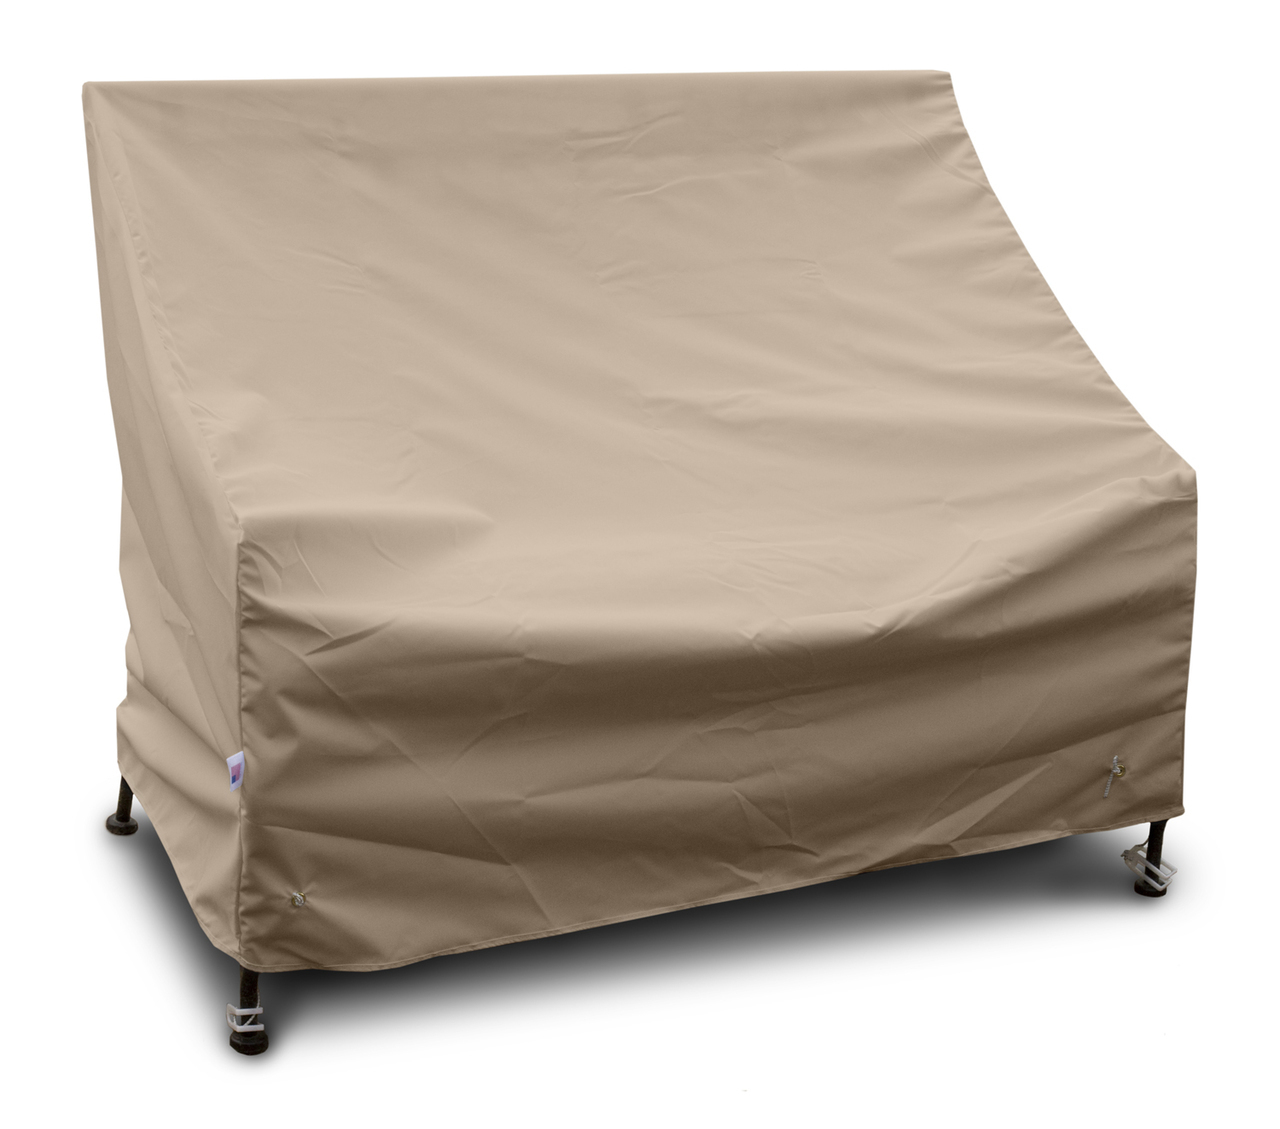 Bench and Glider Cover - 75W x 28D x 37H in.